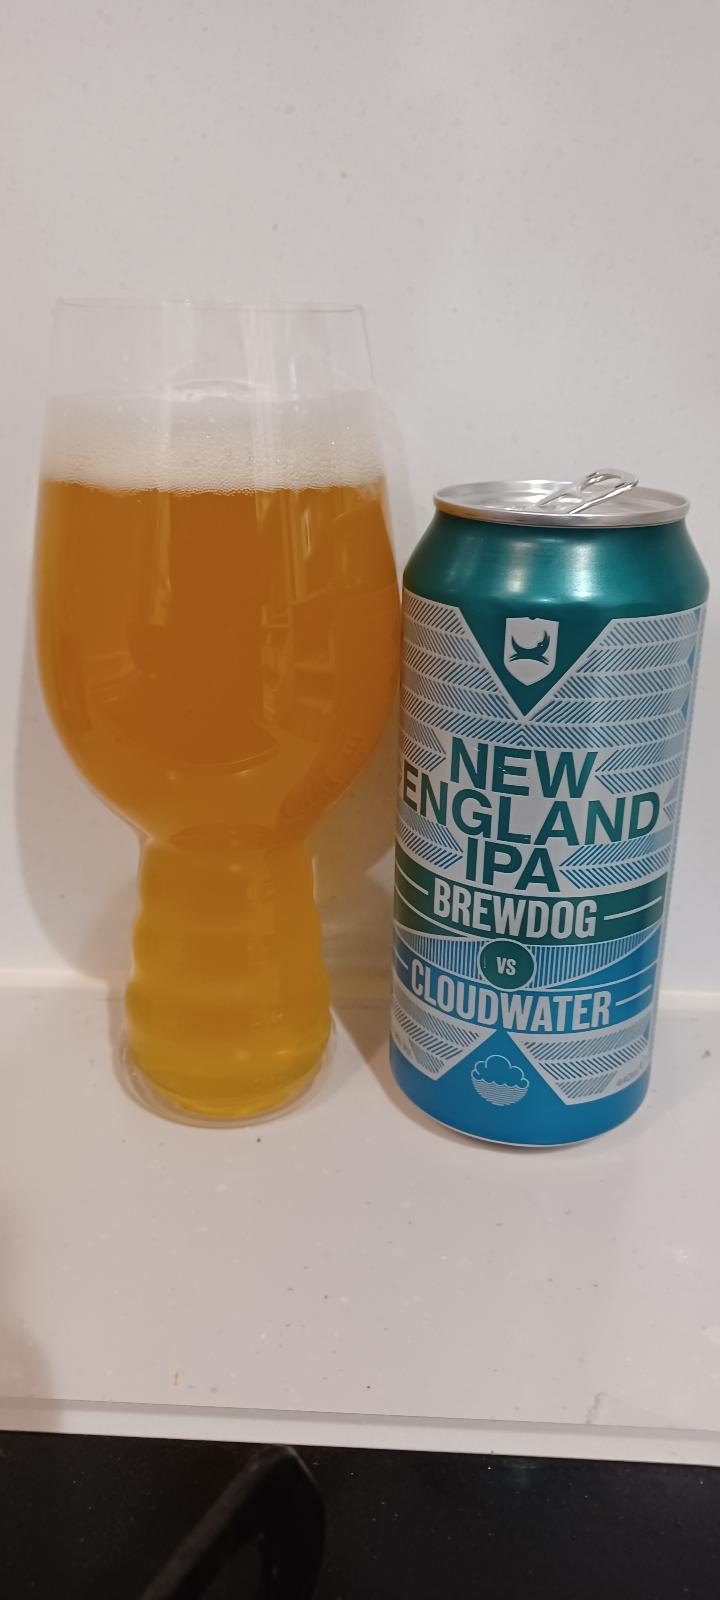 New England IPA v2 (with Cloudwater)